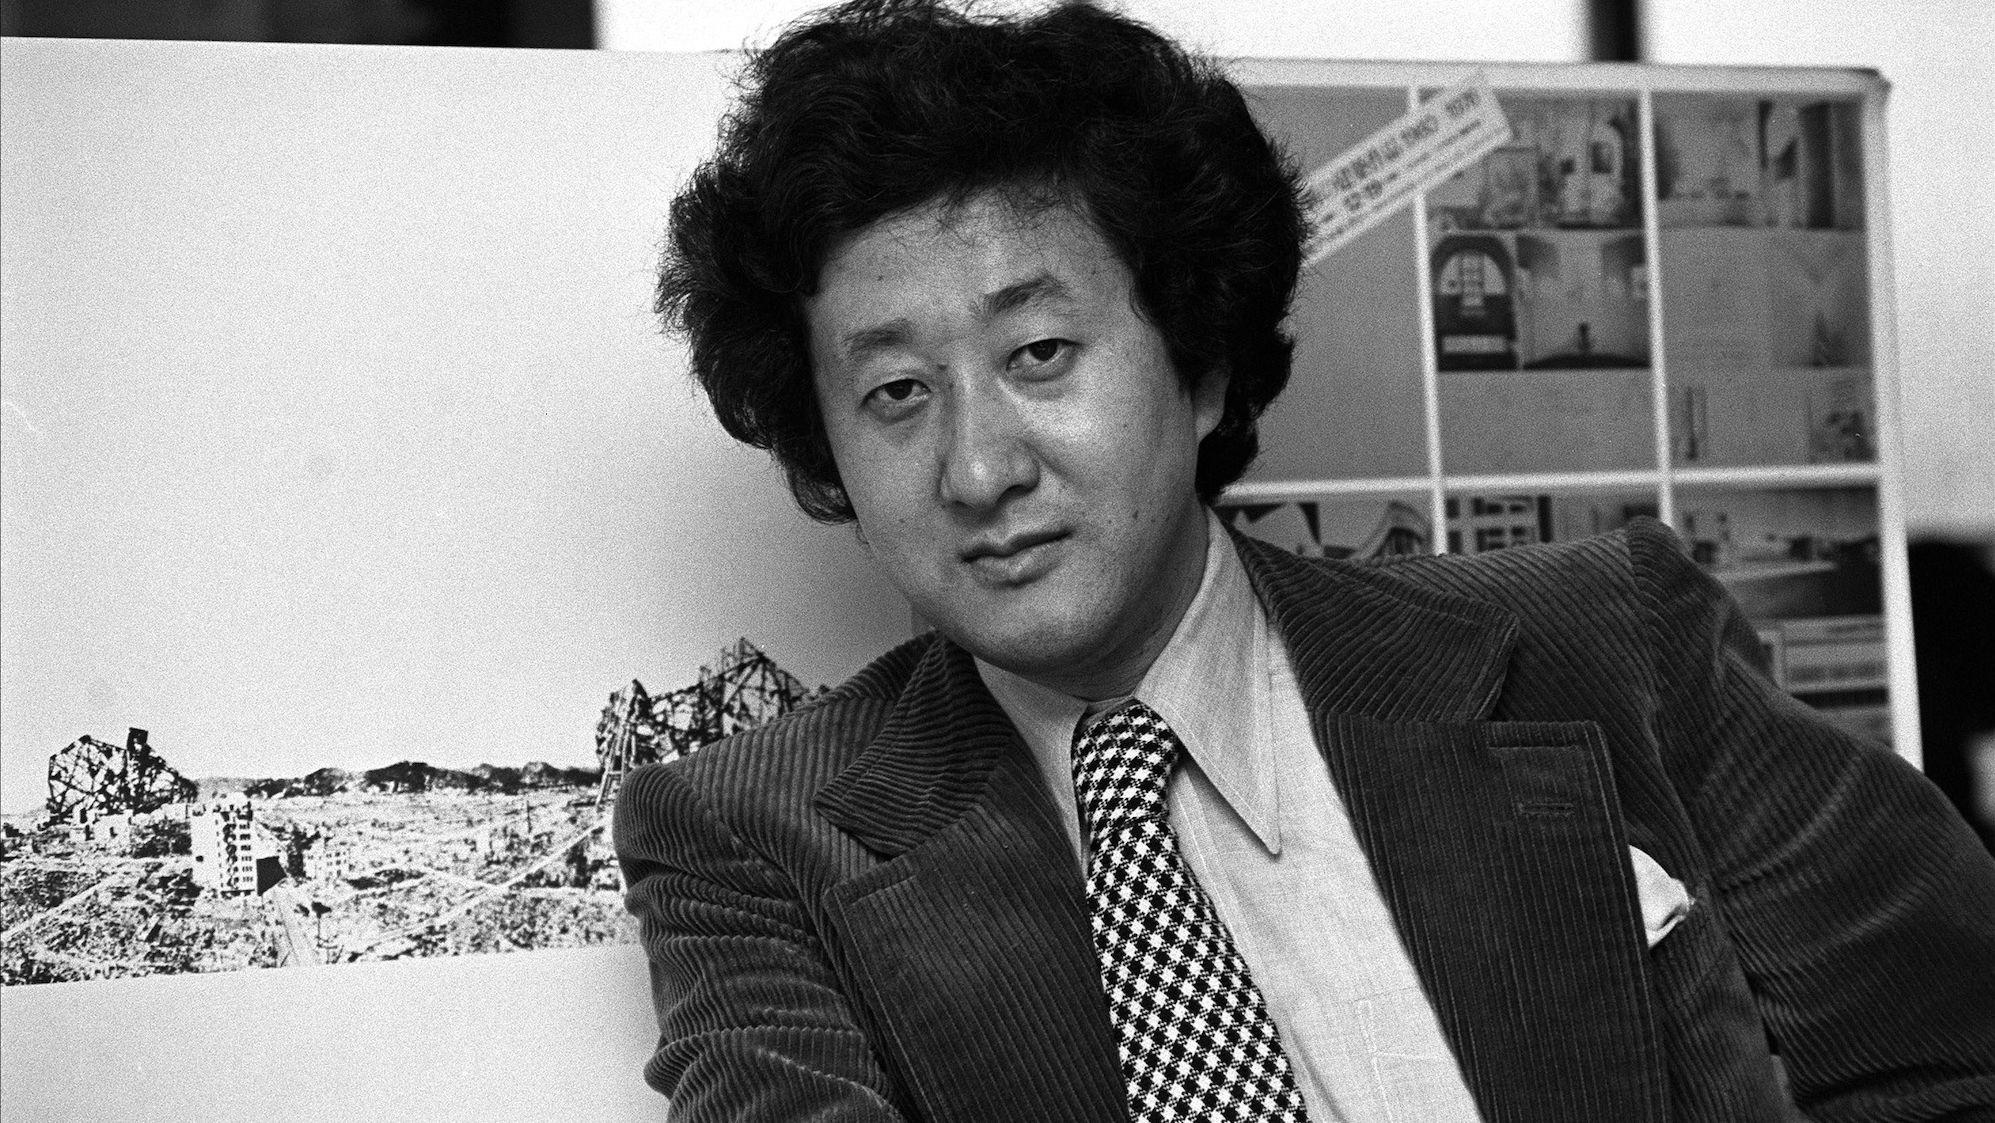 Renowned Japanese architect <a href="https://www.cnn.com/style/article/arata-isozaki-obituary/index.html" target="_blank">Arata Isozaki</a> died Wednesday, December 28, at the age of 91, according to his longtime partner Misa Shin. Isozaki played a major role in postmodern architecture and won the Pritzker Prize in 2019.